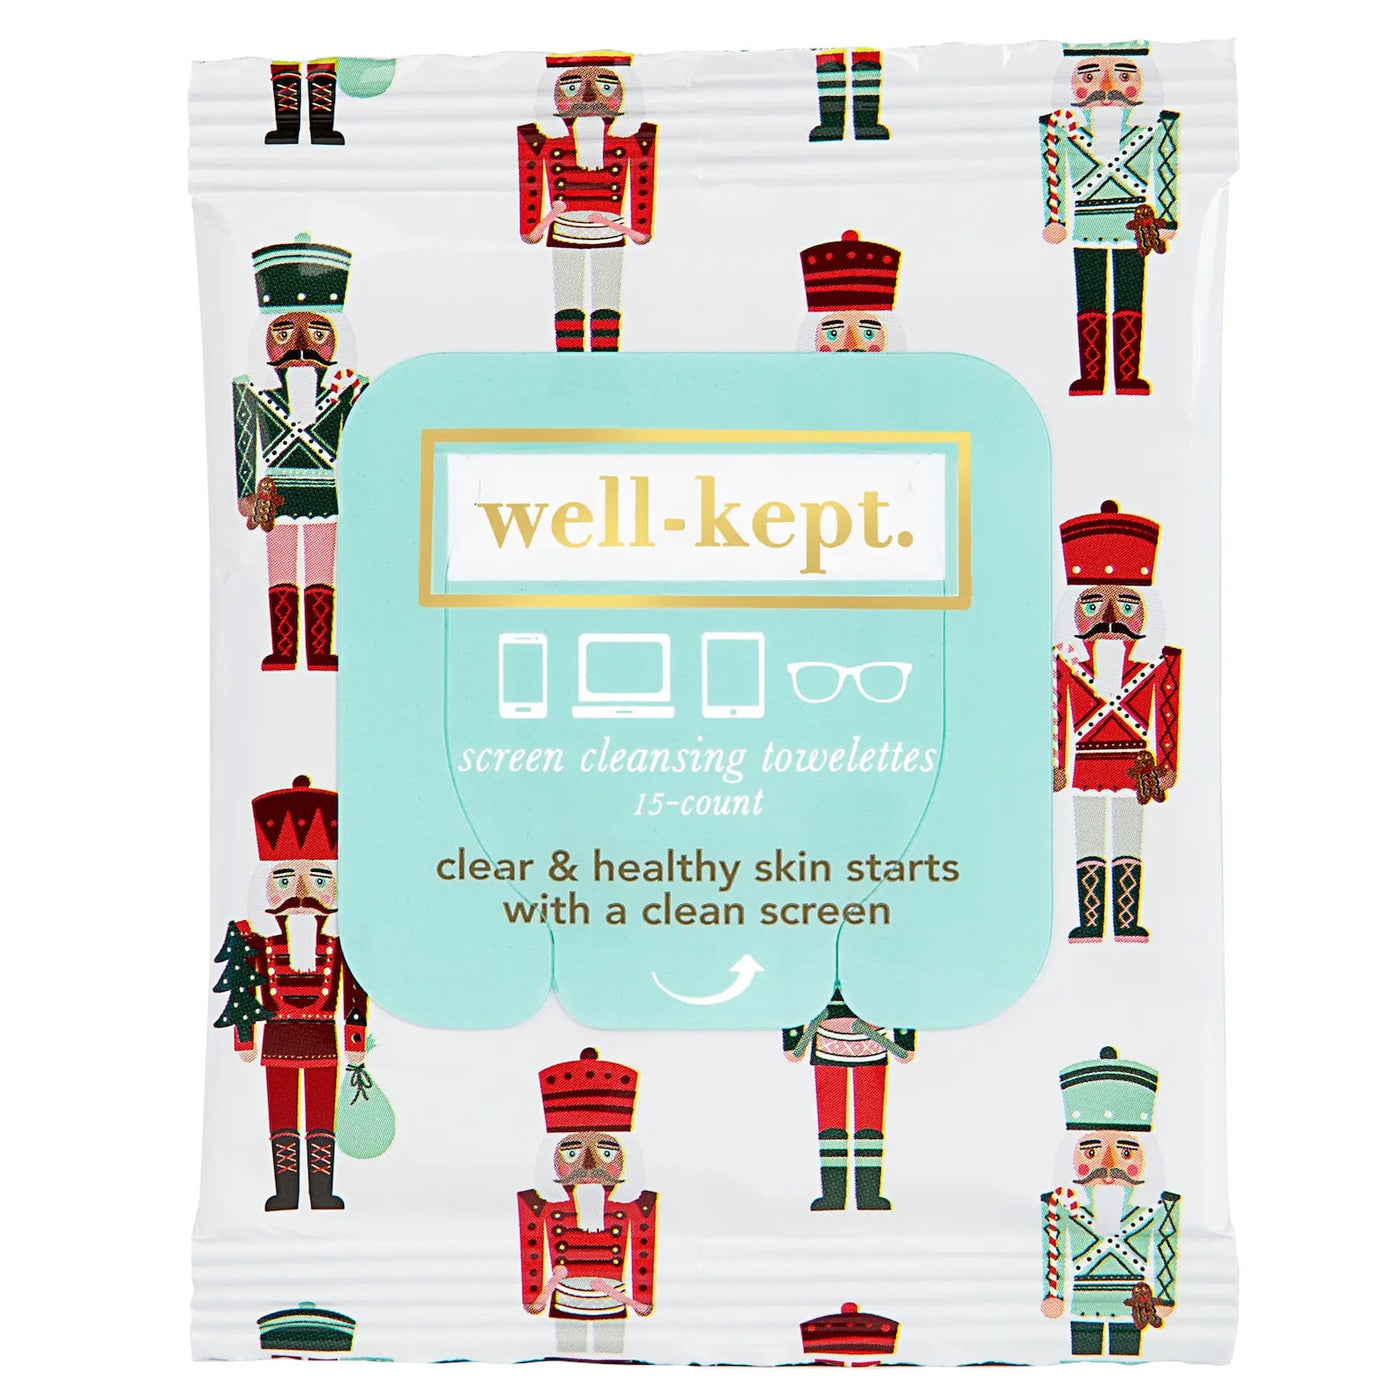 Nutcracker Screen Cleansing Towelettes